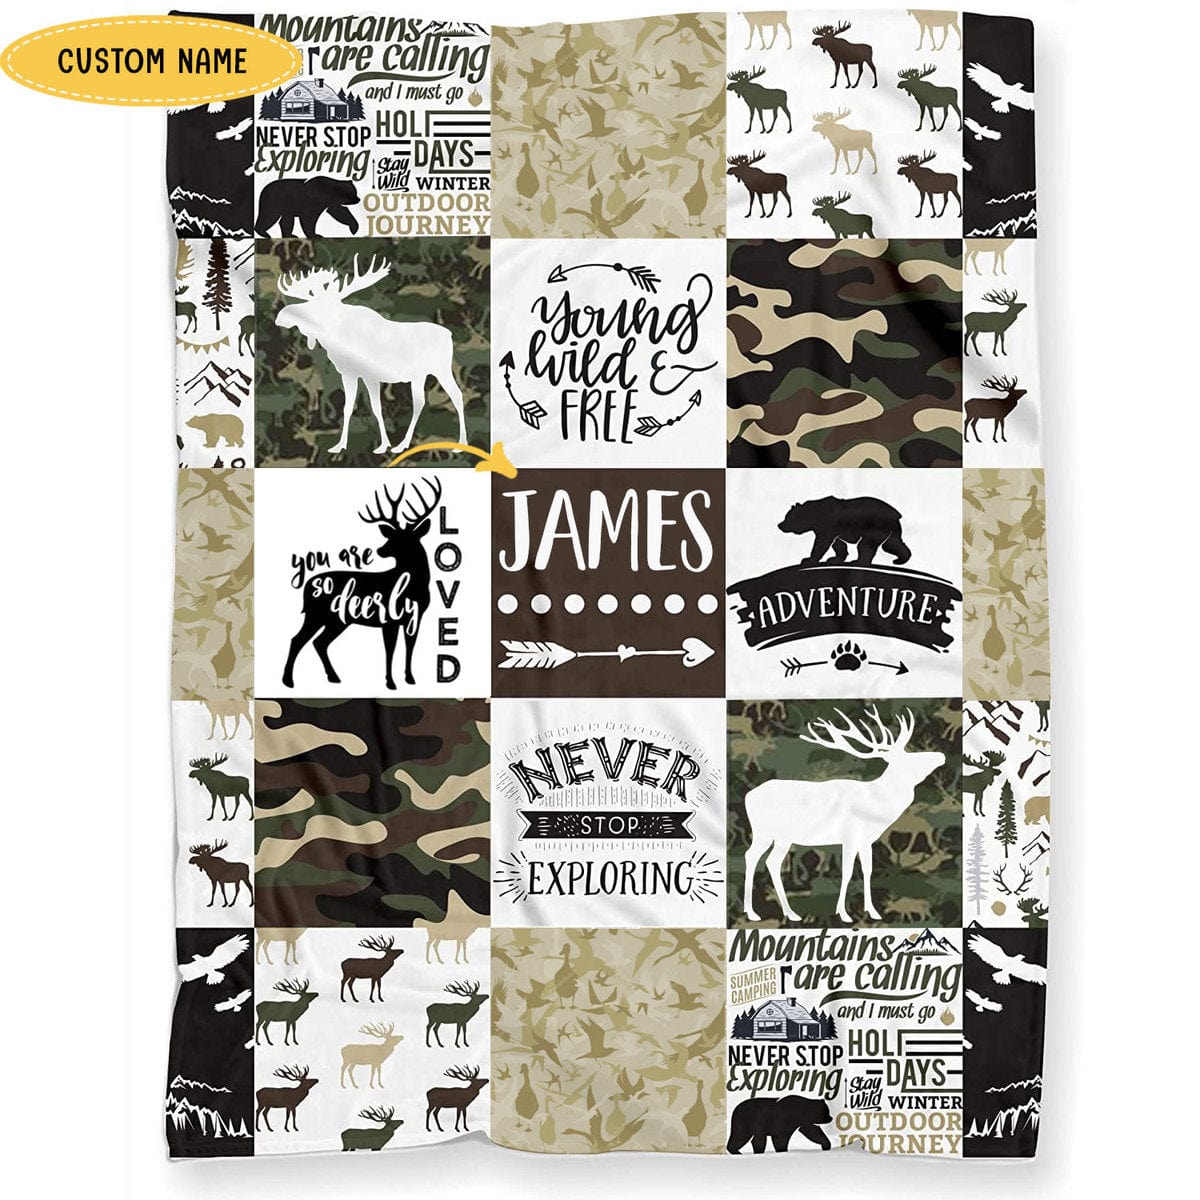 1. The Importance of Cozy Nights Outdoors: Personalized Hunting Blankets for Camping